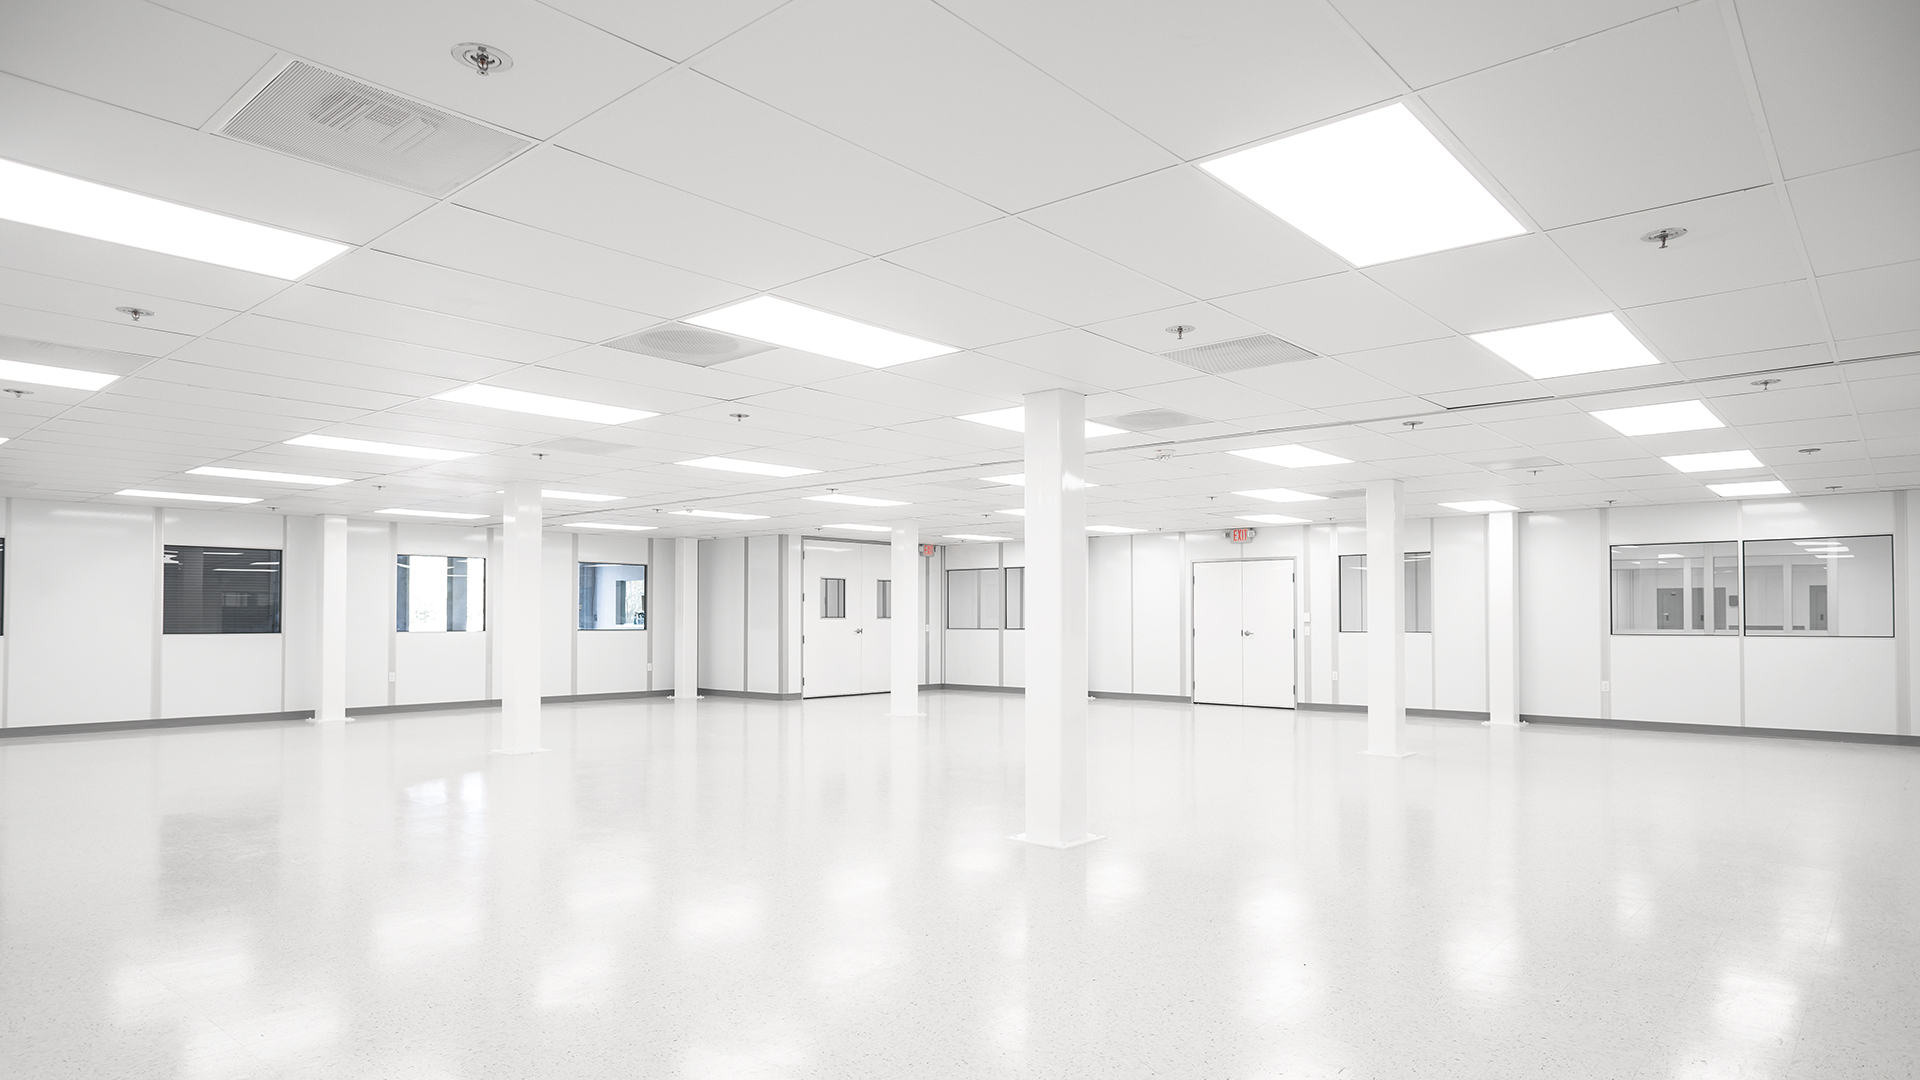 Modular Cleanroom by allied cleanrooms Clean room by Allied Cleanrooms - USP 797, and ISO 4, ISO 5, ISO 6, ISO 7, and IS0 8, cGMP cleanroom manufacturing, soft wall cleanrooms FED-STD-209E and ISO 14644-1, control contamination